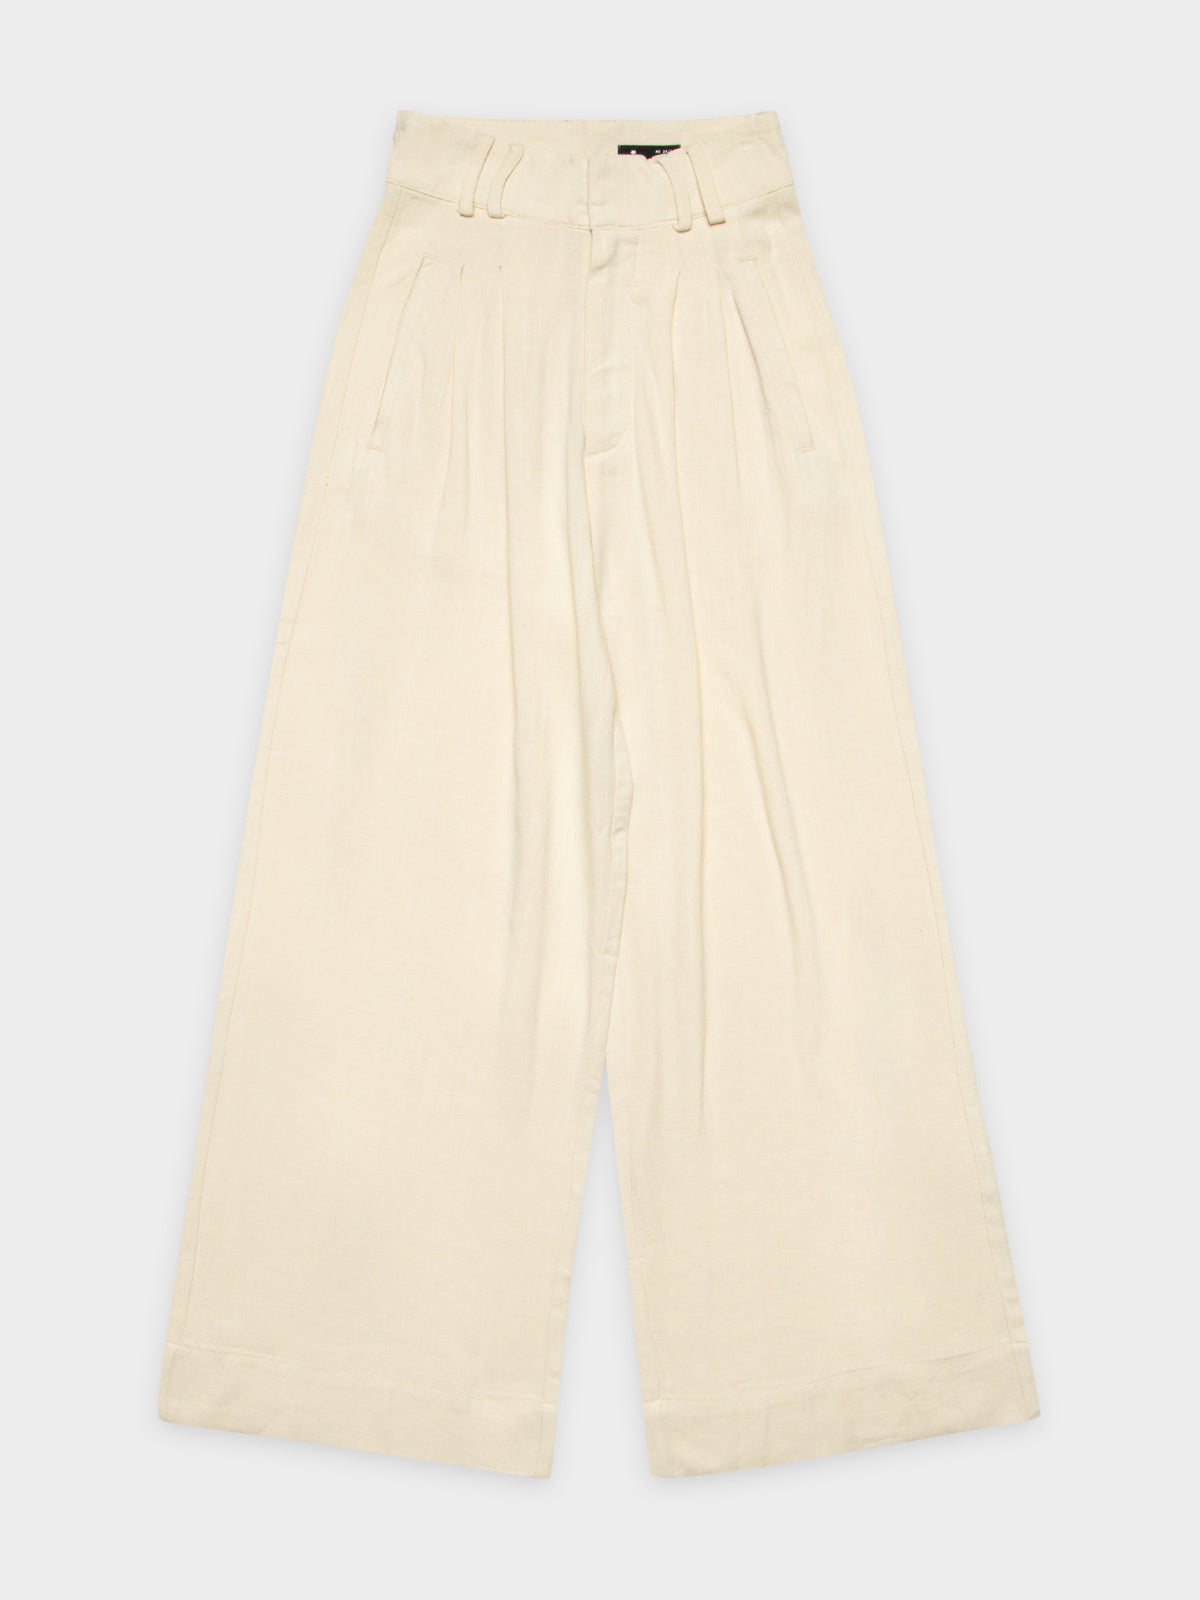 Muse Pants in Ivory